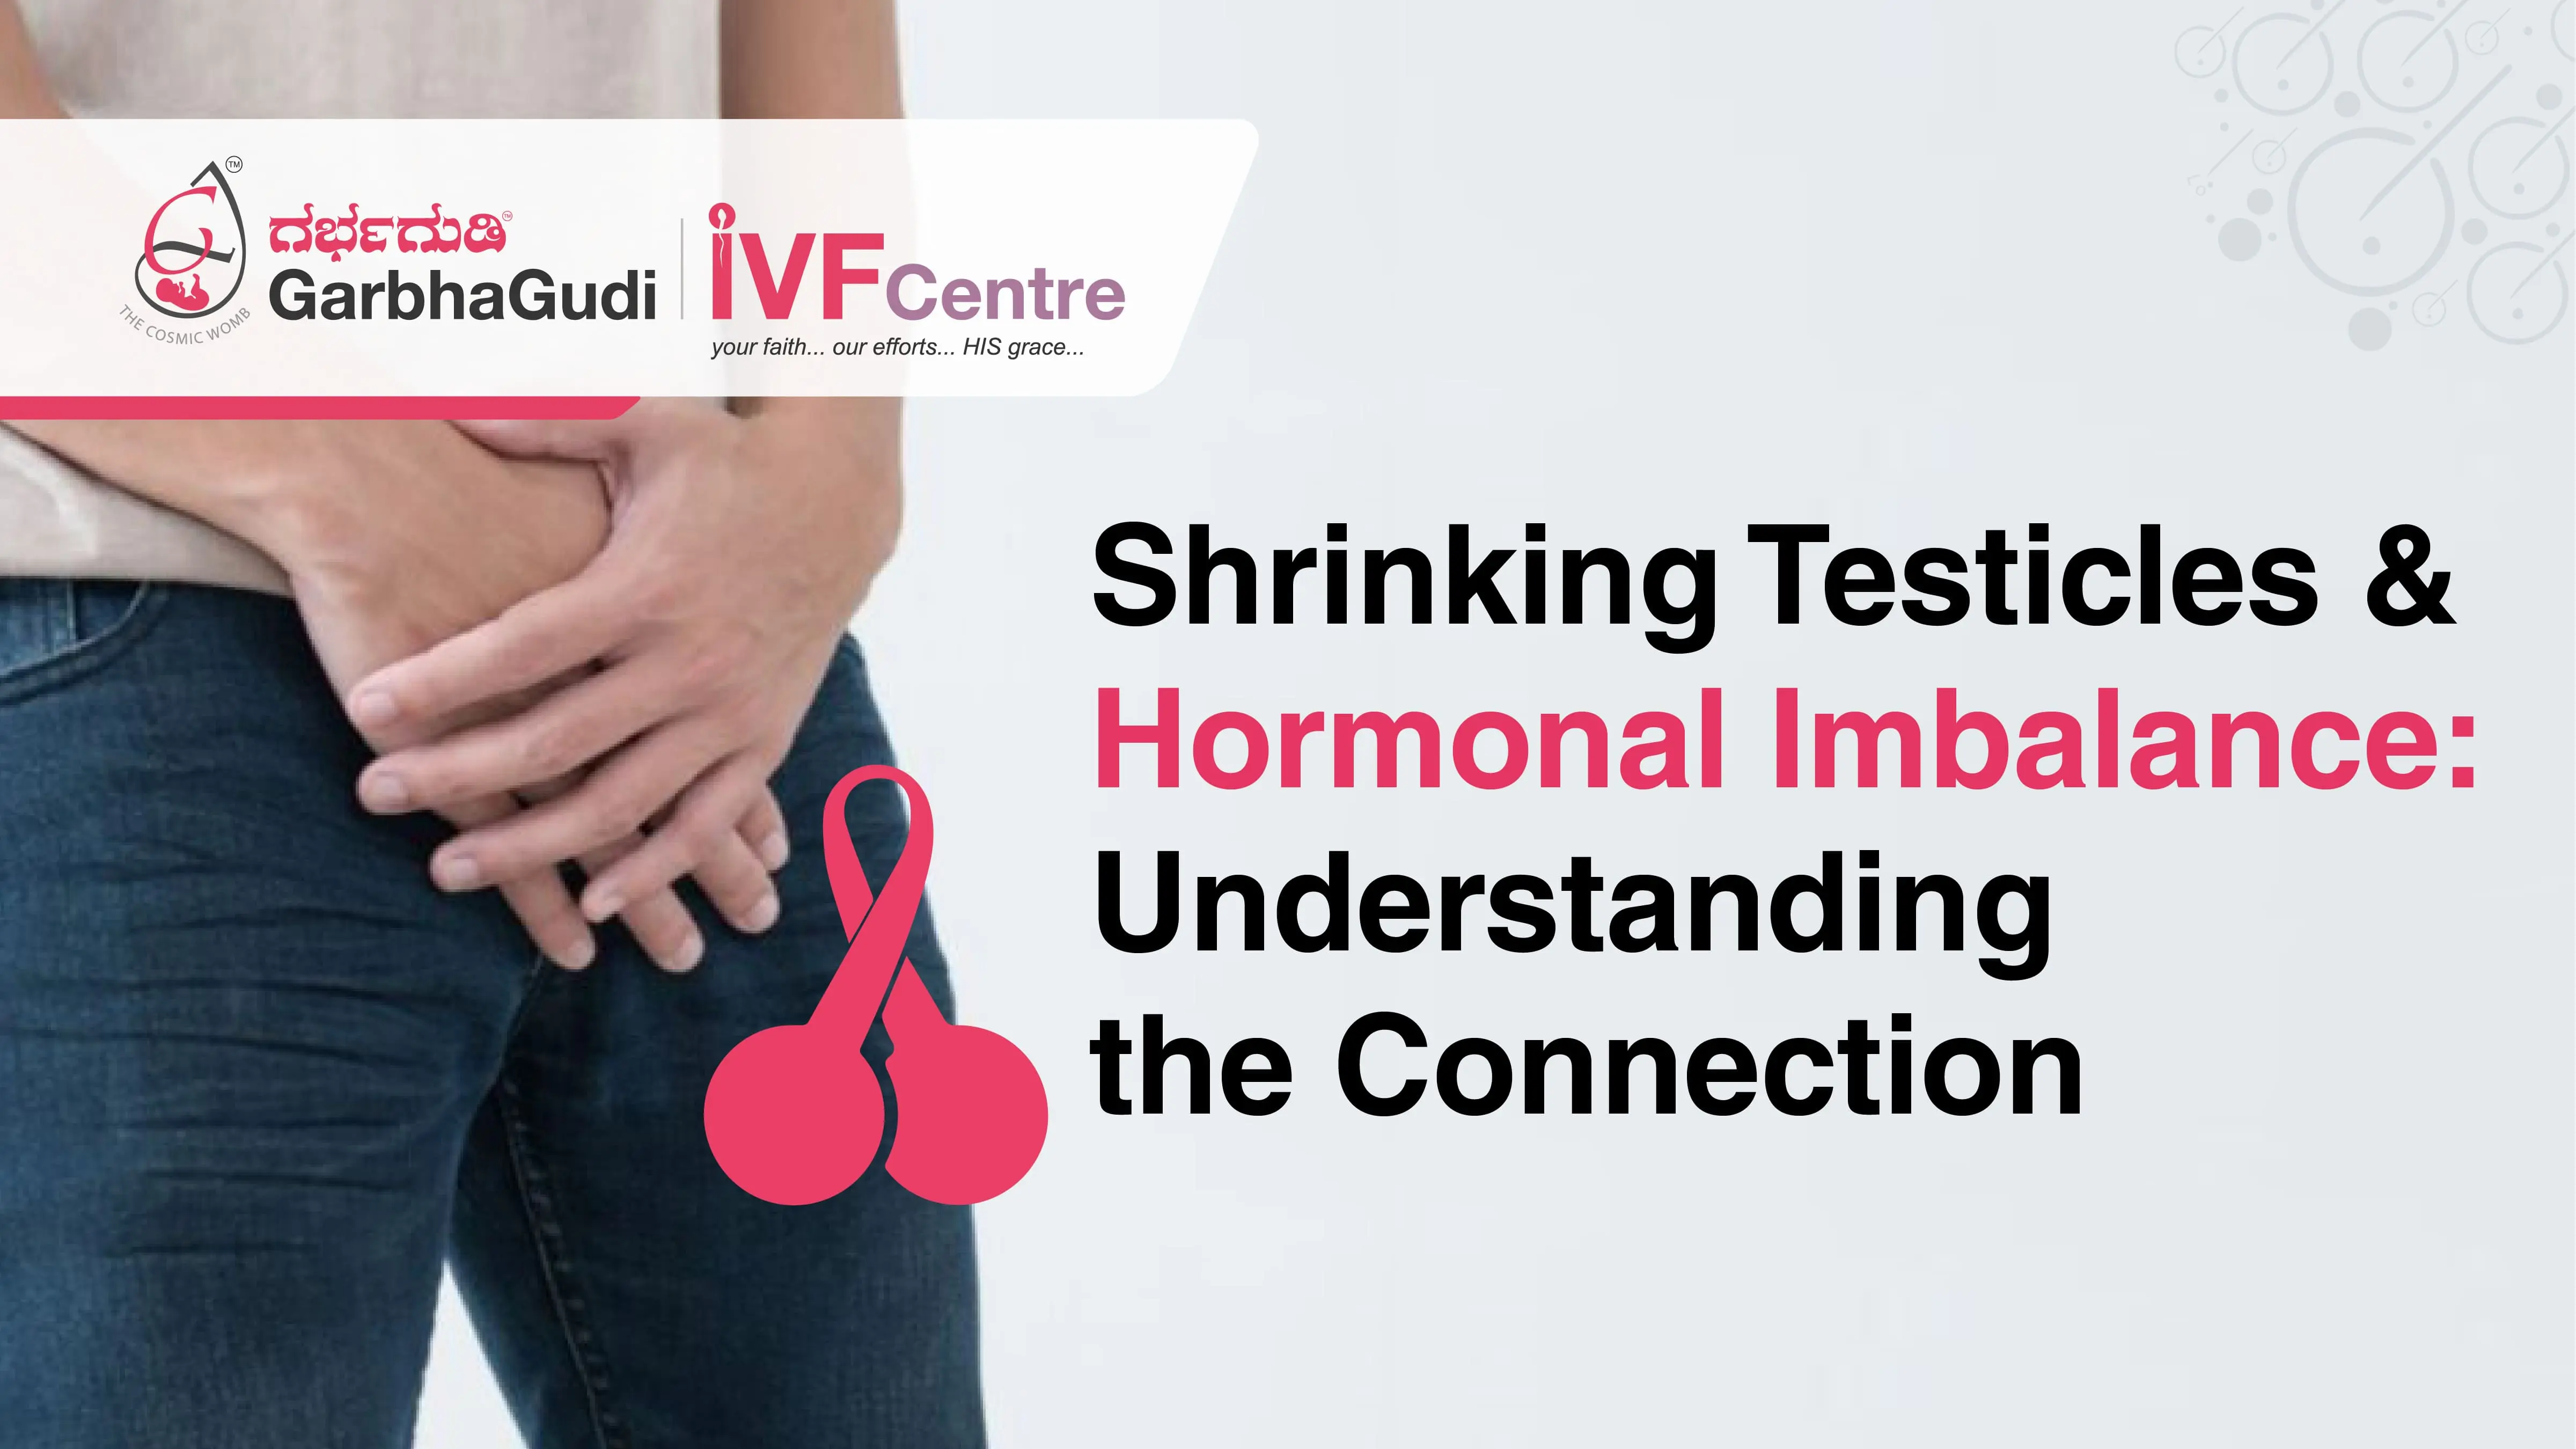 Shrinking Testicles and Hormonal Imbalance: Understanding the Connection